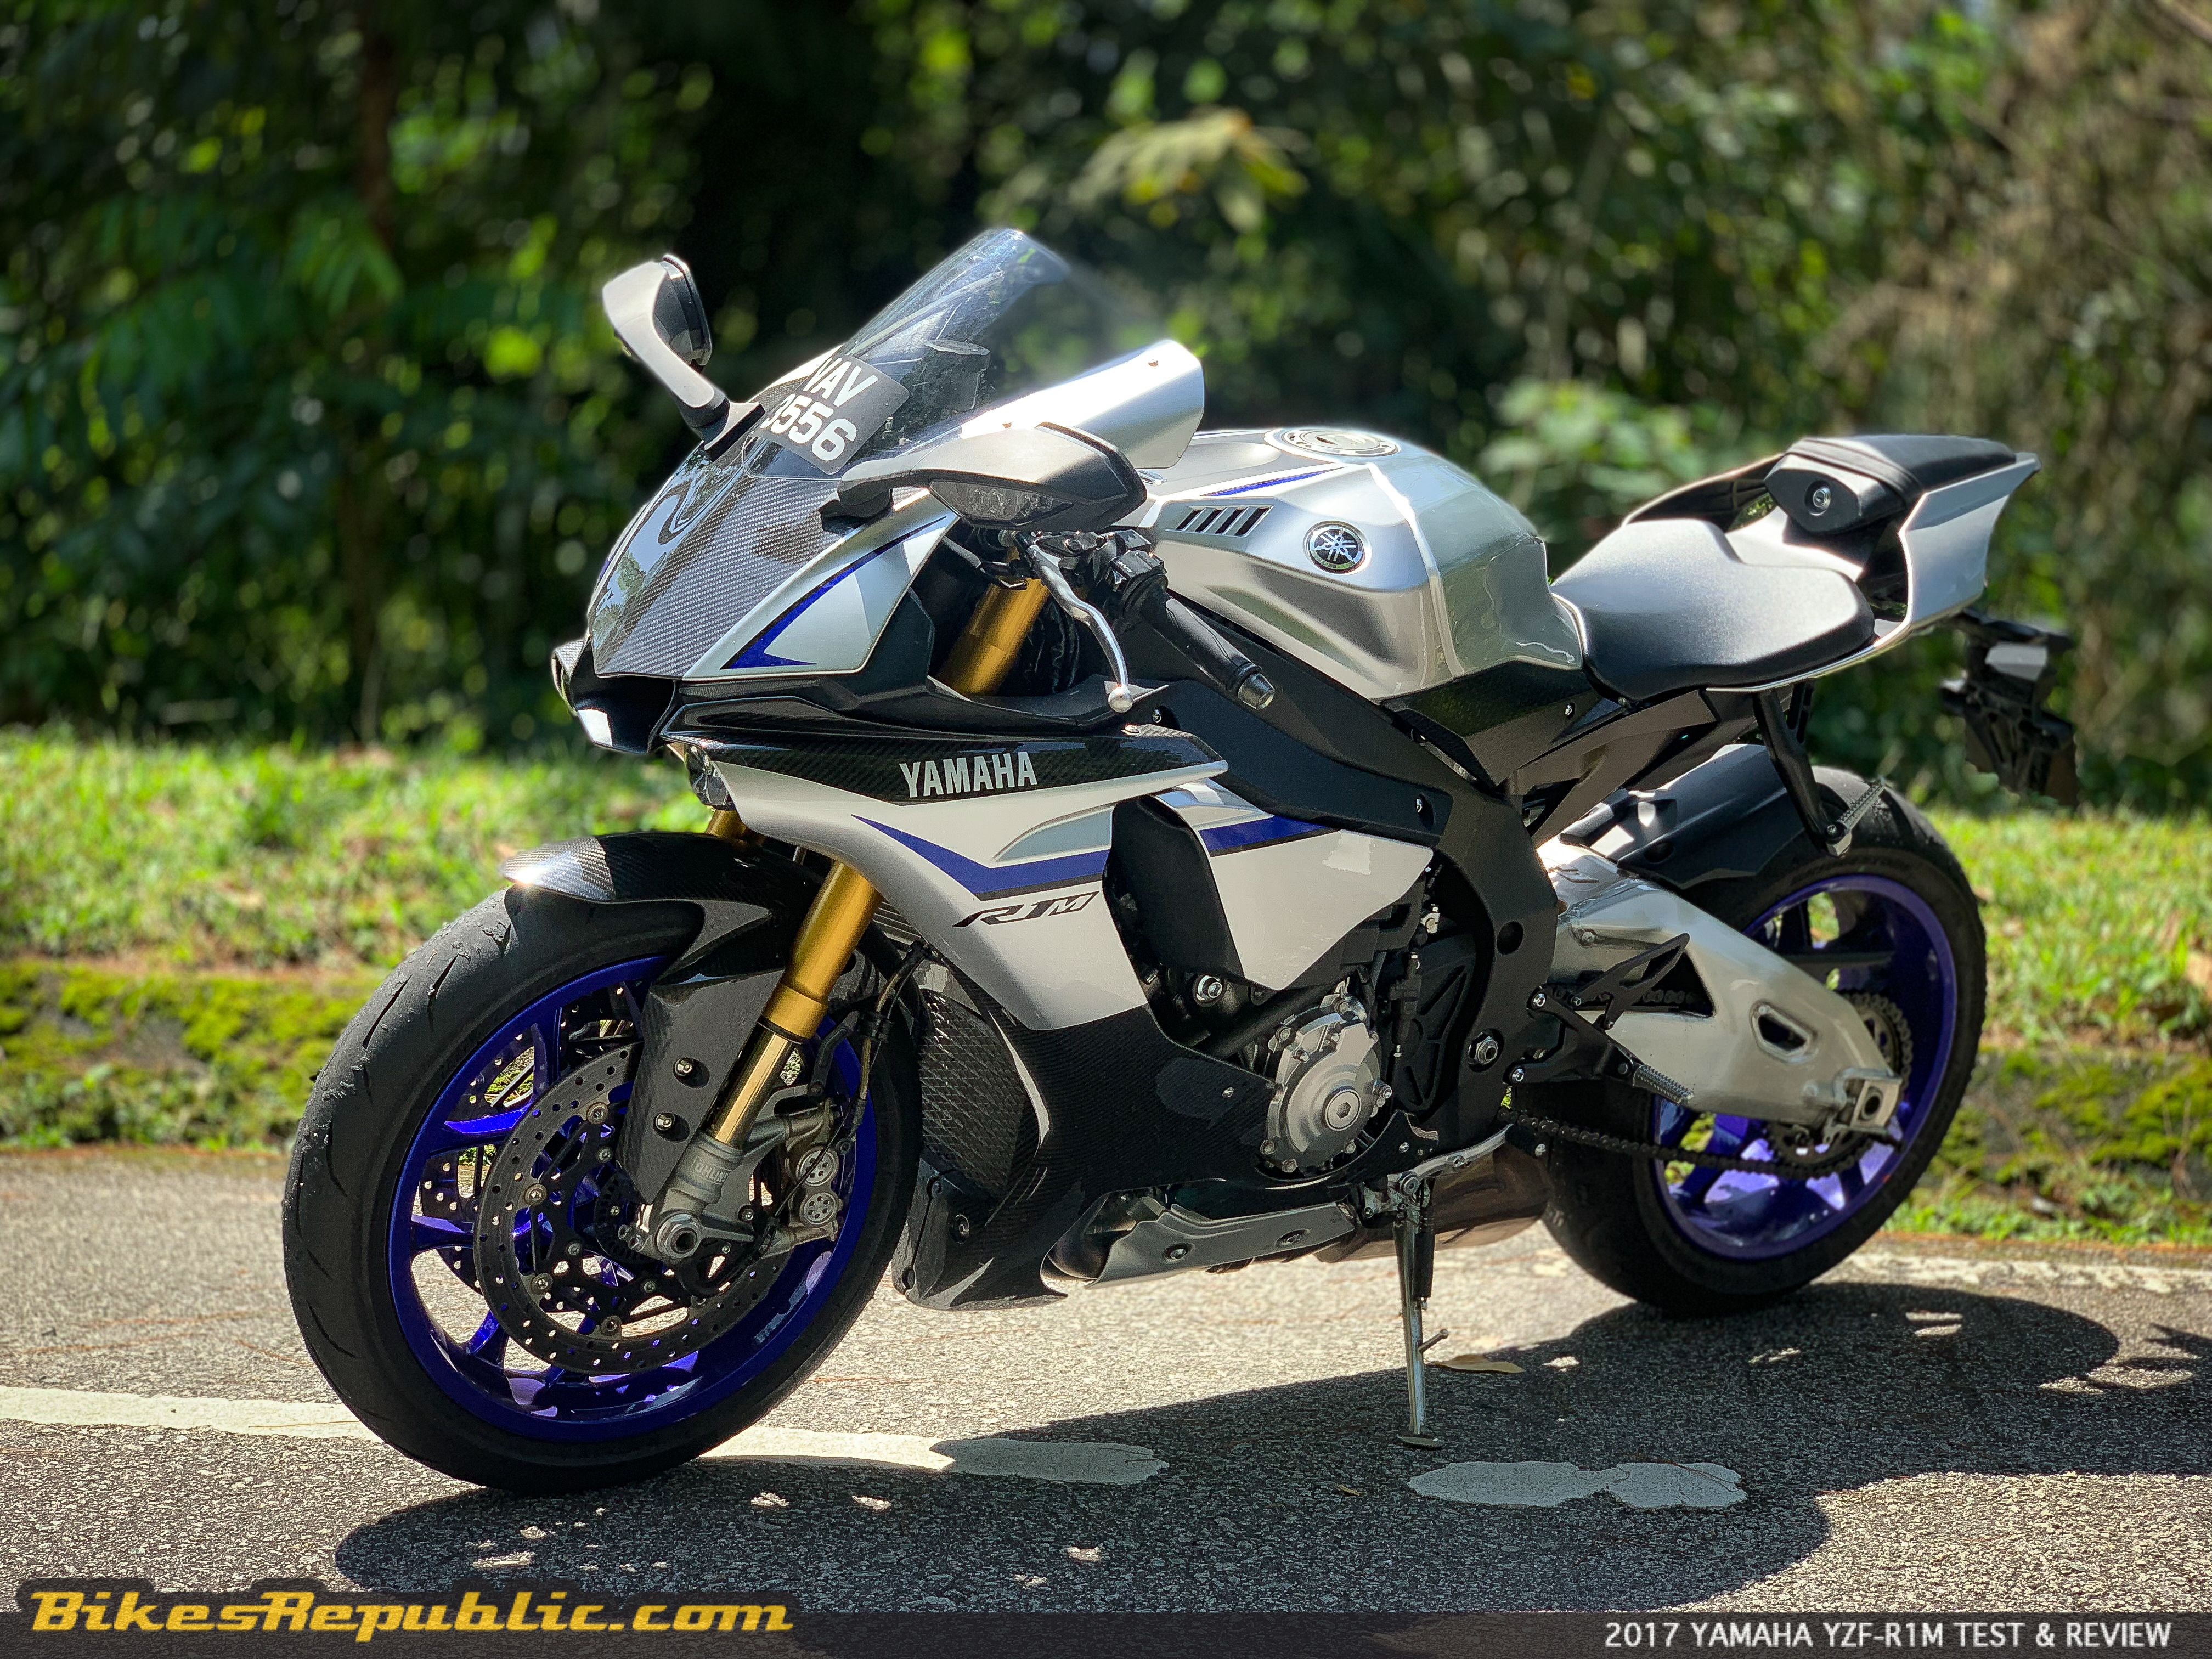 Yamaha YZF R1M Test & Review, “The Game Changer”